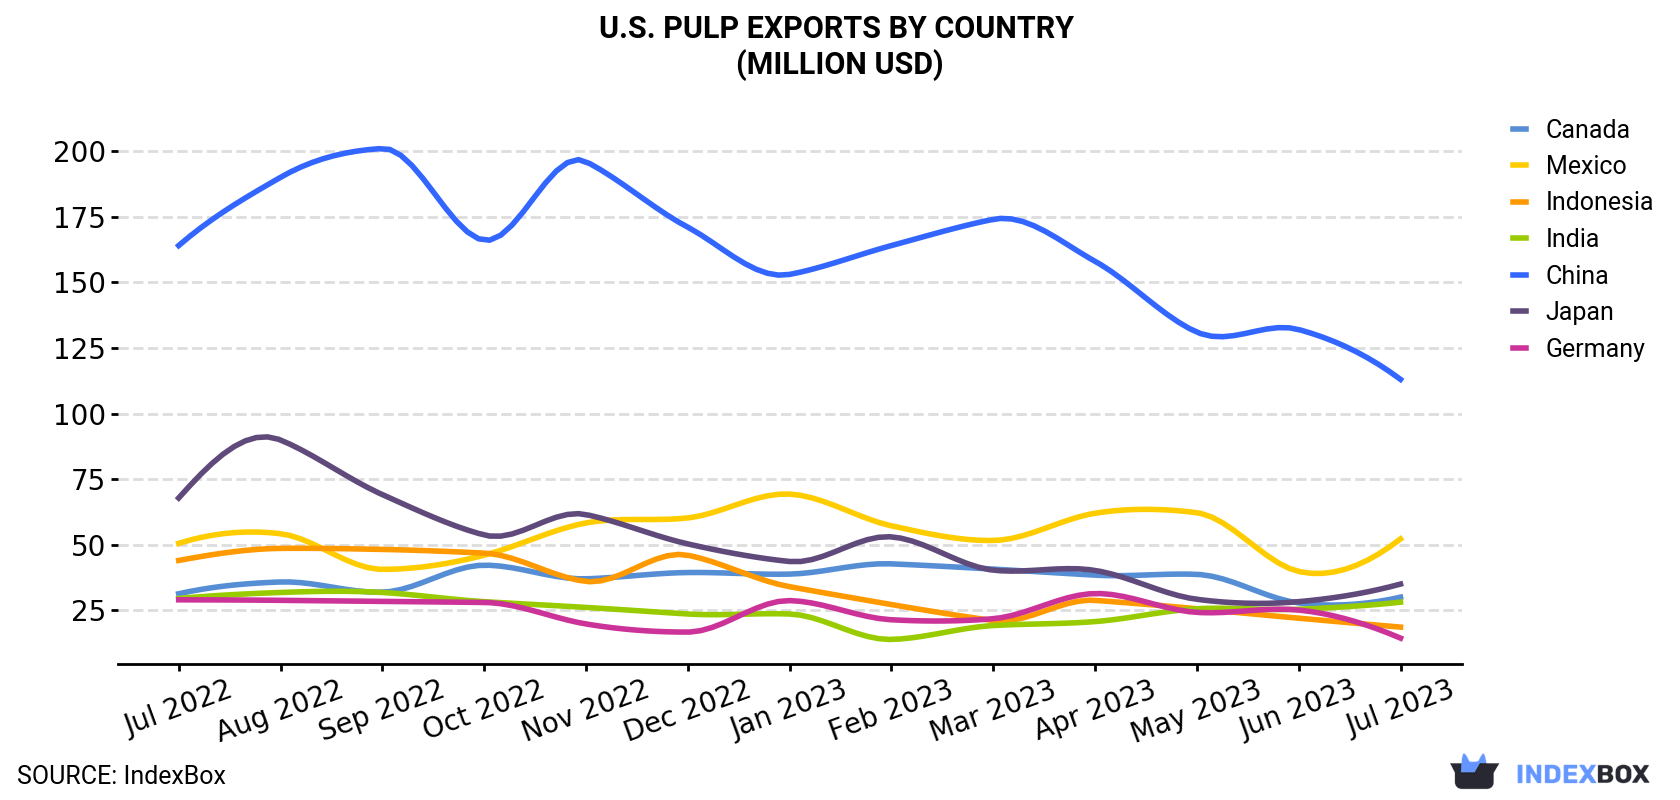 U.S. Pulp Exports By Country (Million USD)